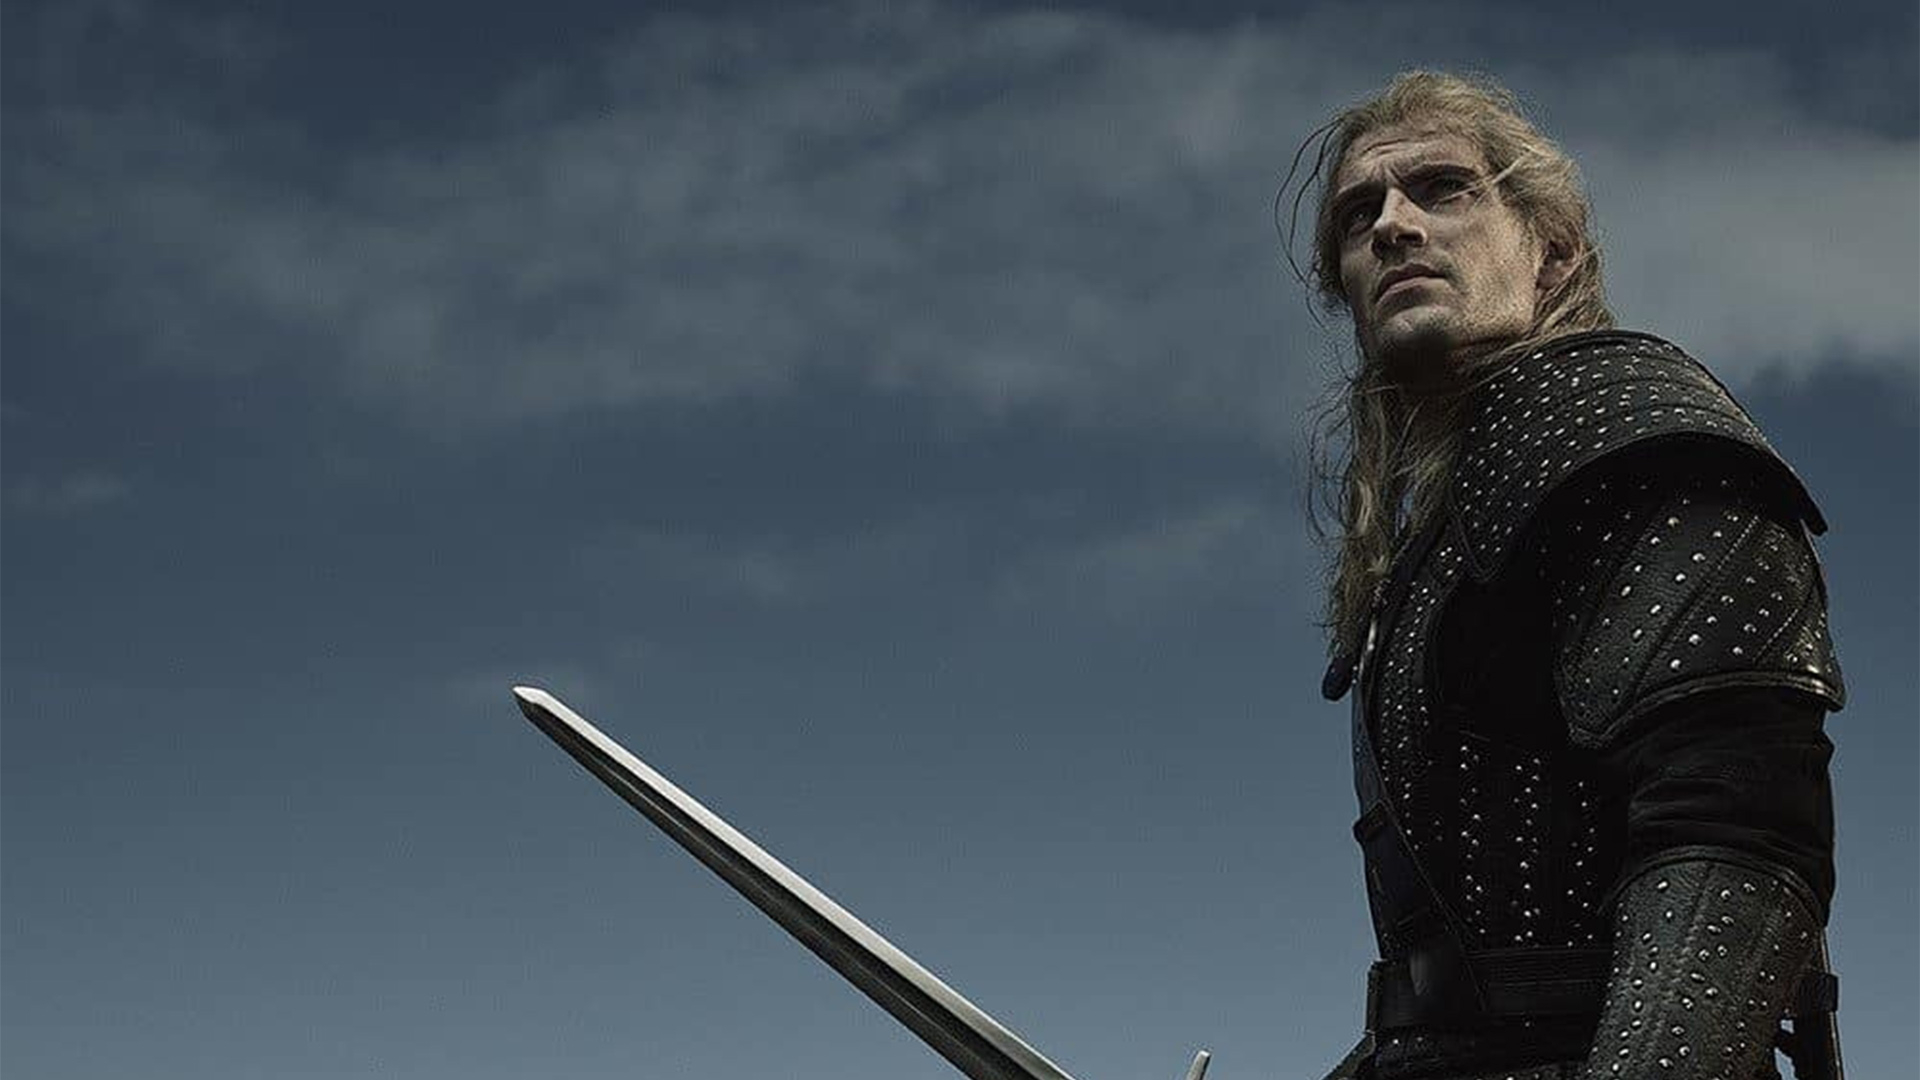 The witcher cavill sword 1